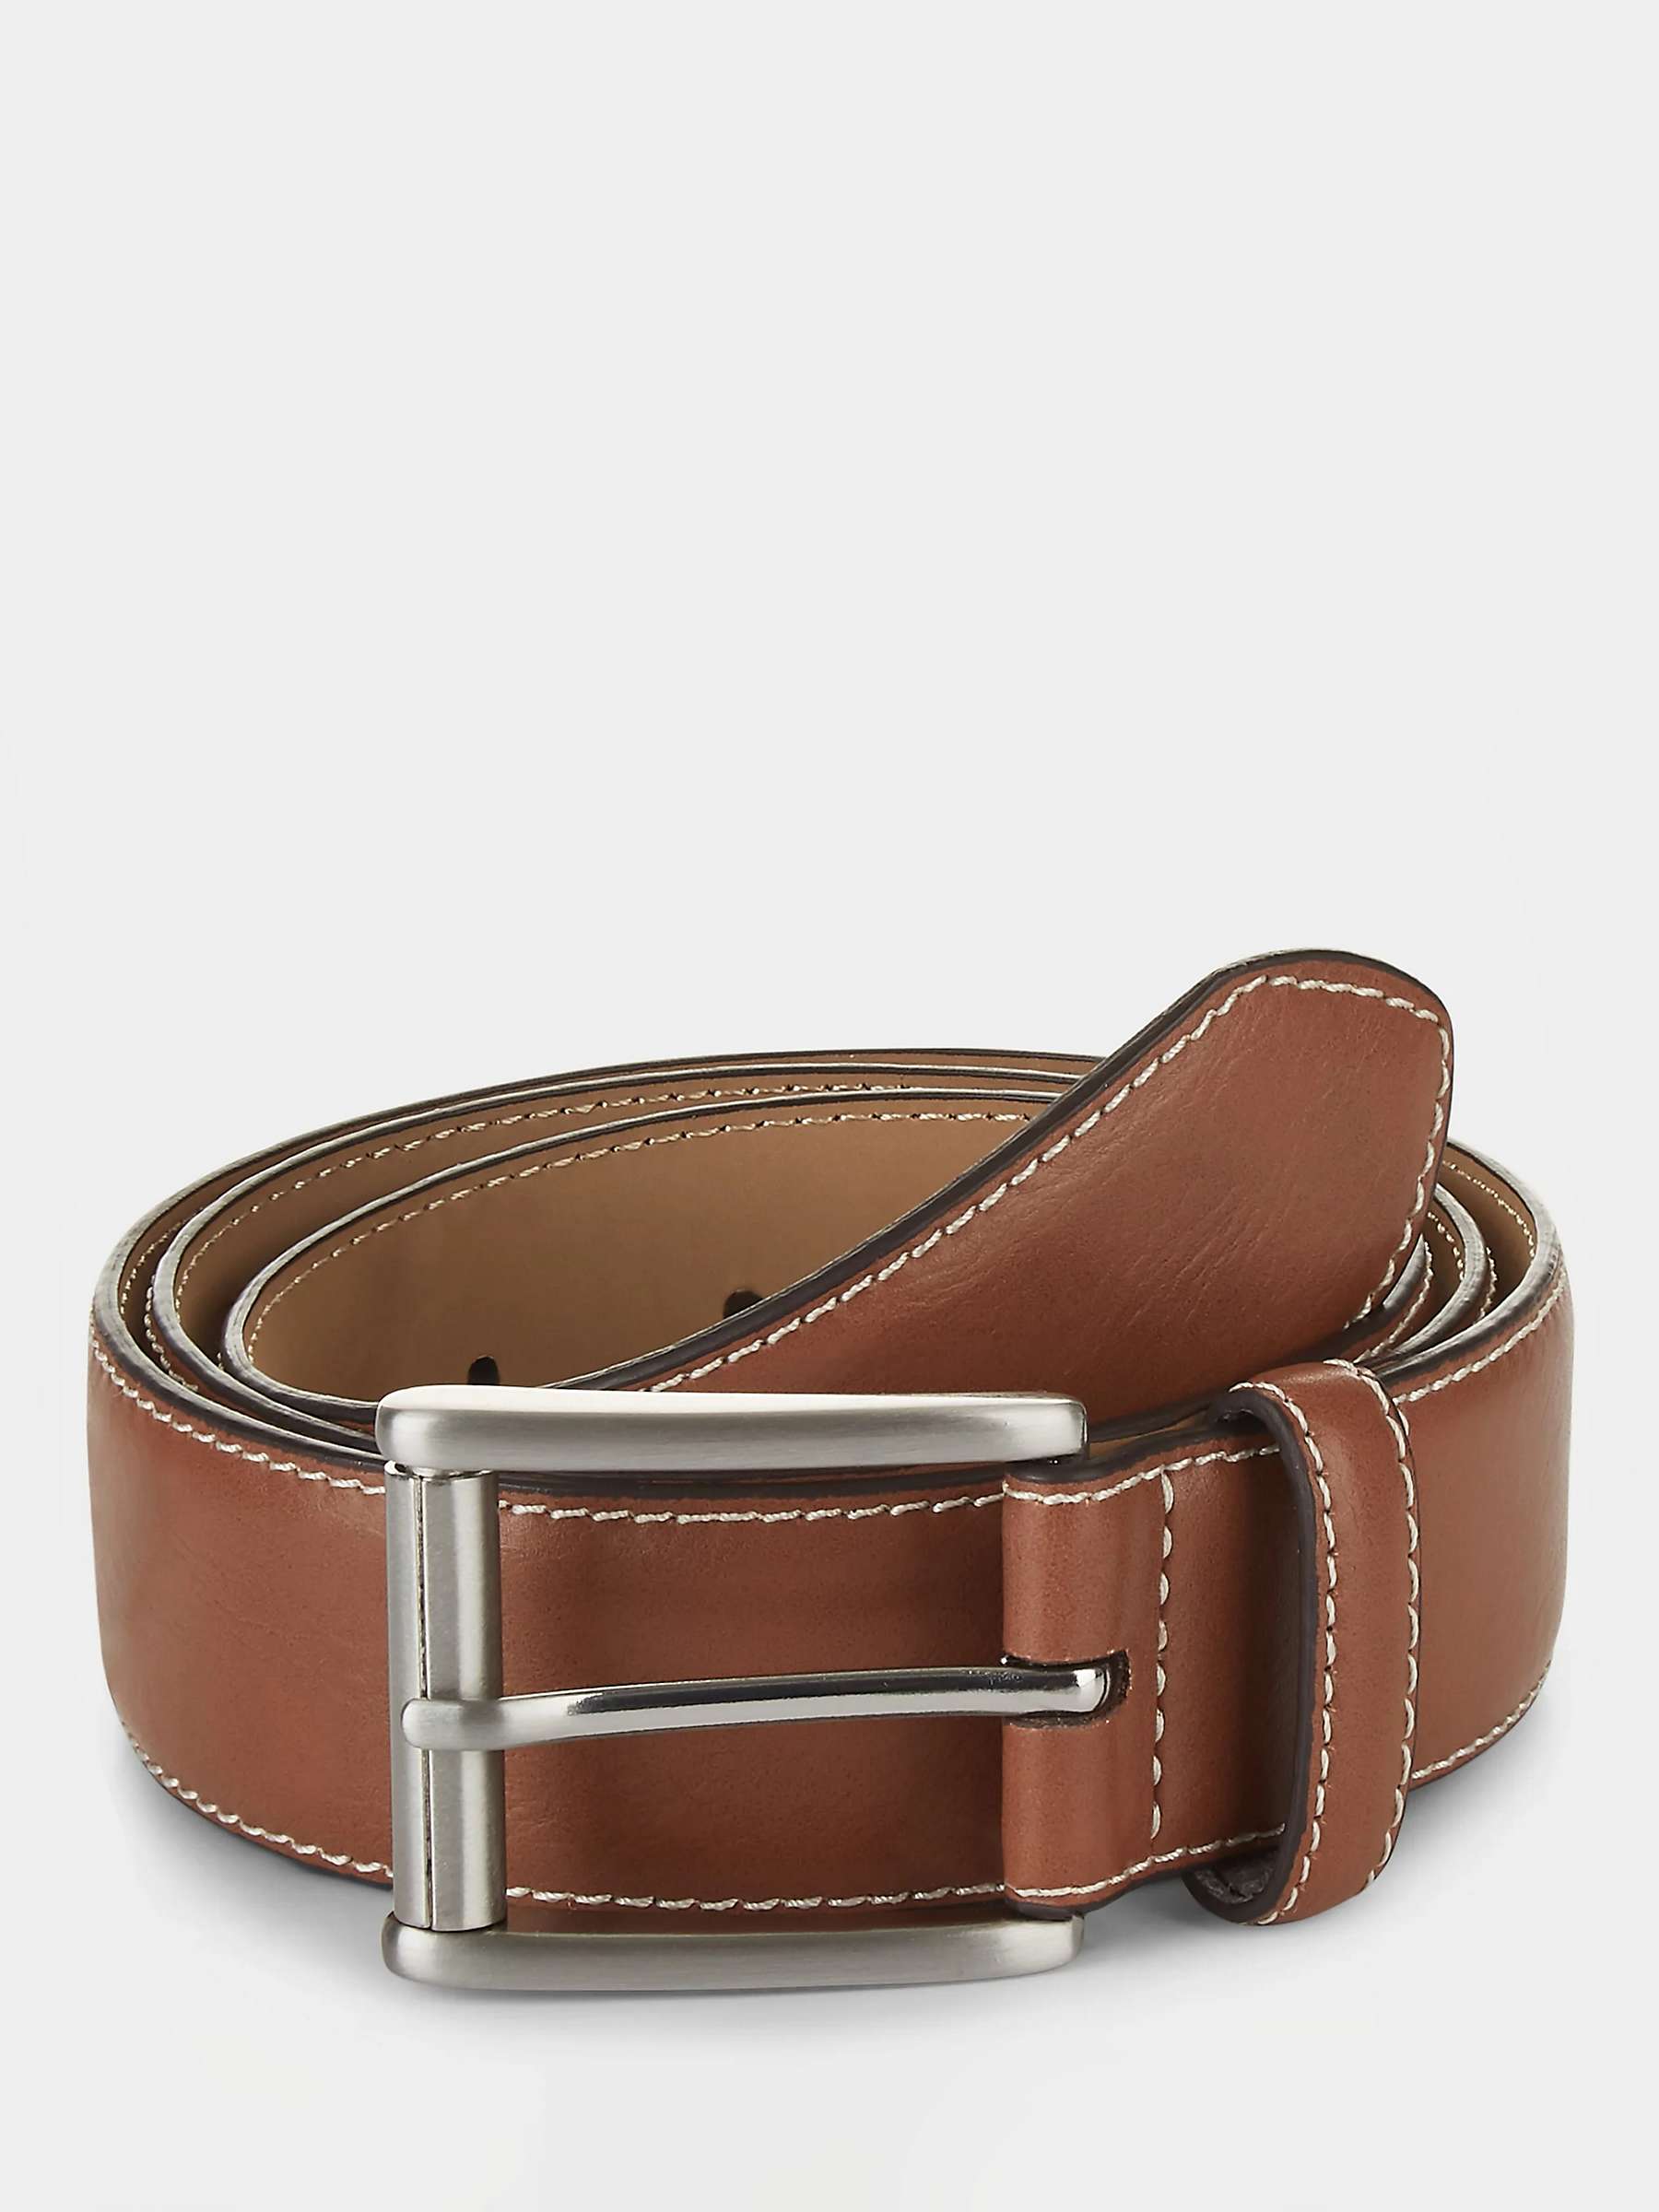 Buy Moss Contrast Stitch Faux Leather Belt, Tan Online at johnlewis.com